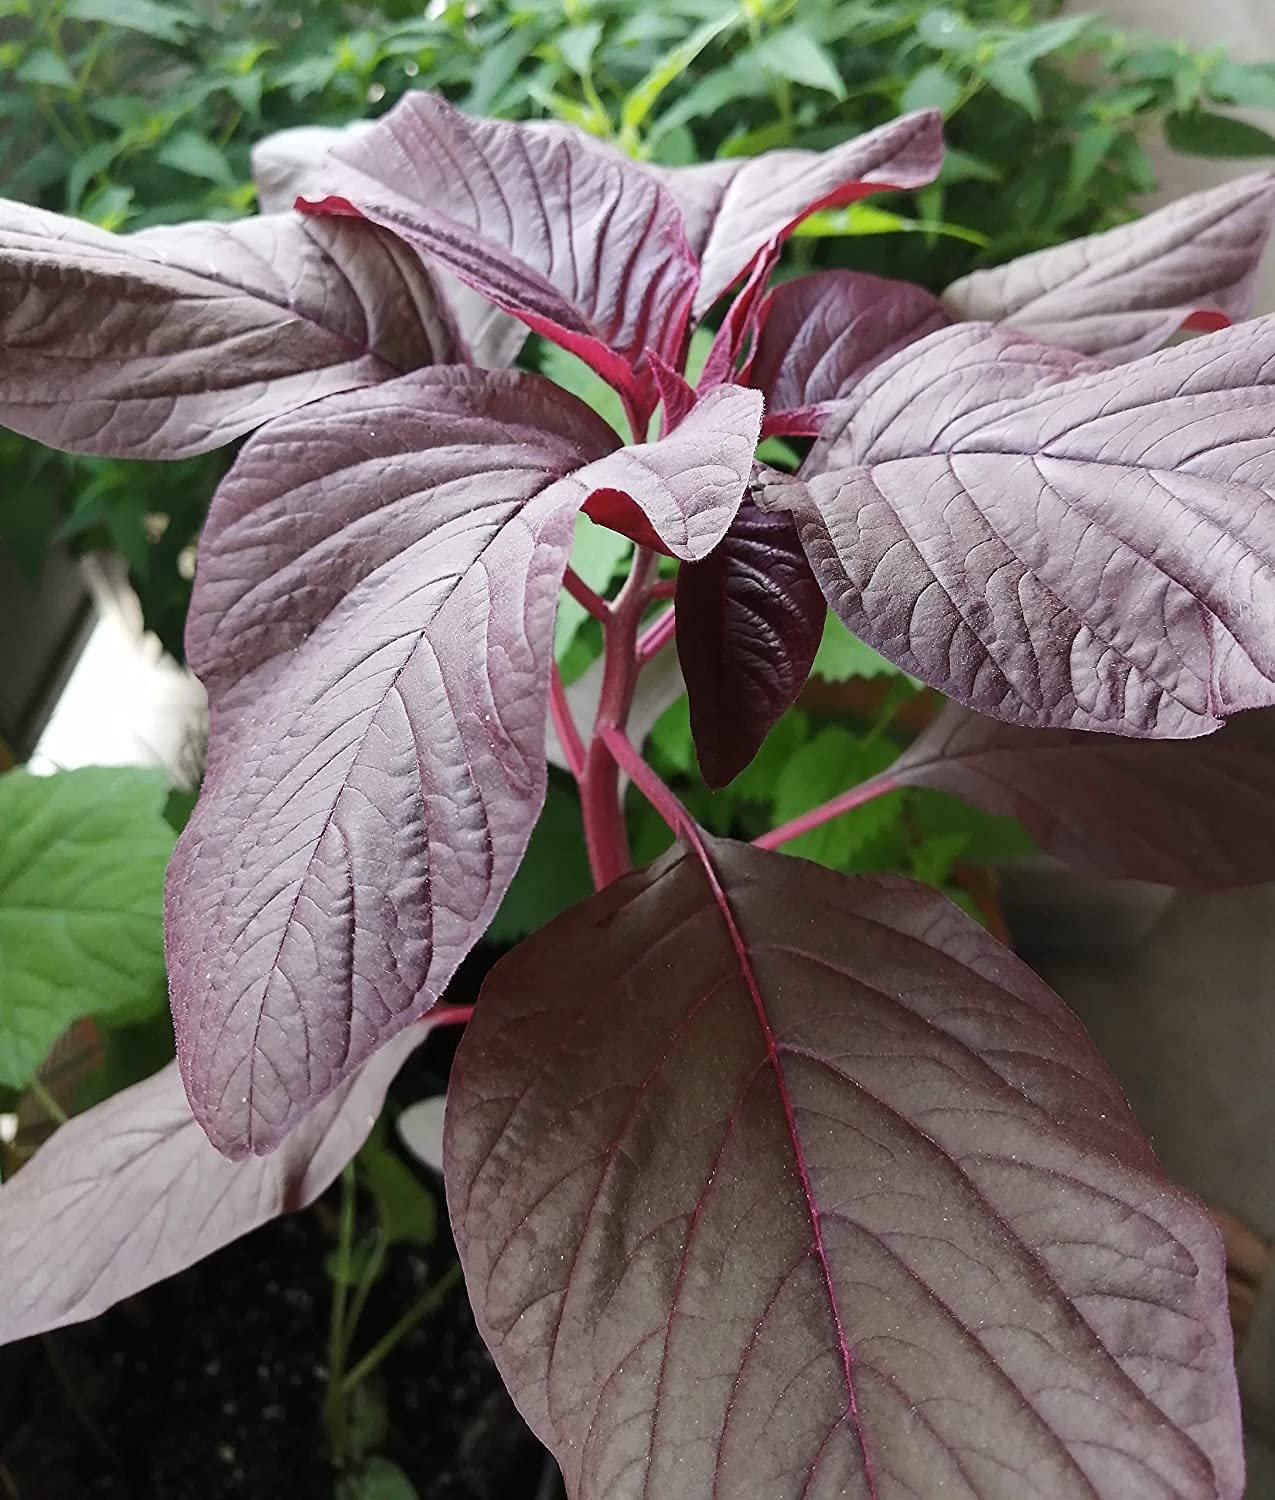 Red Calaloo Garnet Amaranth 1000 Seeds - Chinese Spinach, Yin Choy, Amaranthus Tricolor